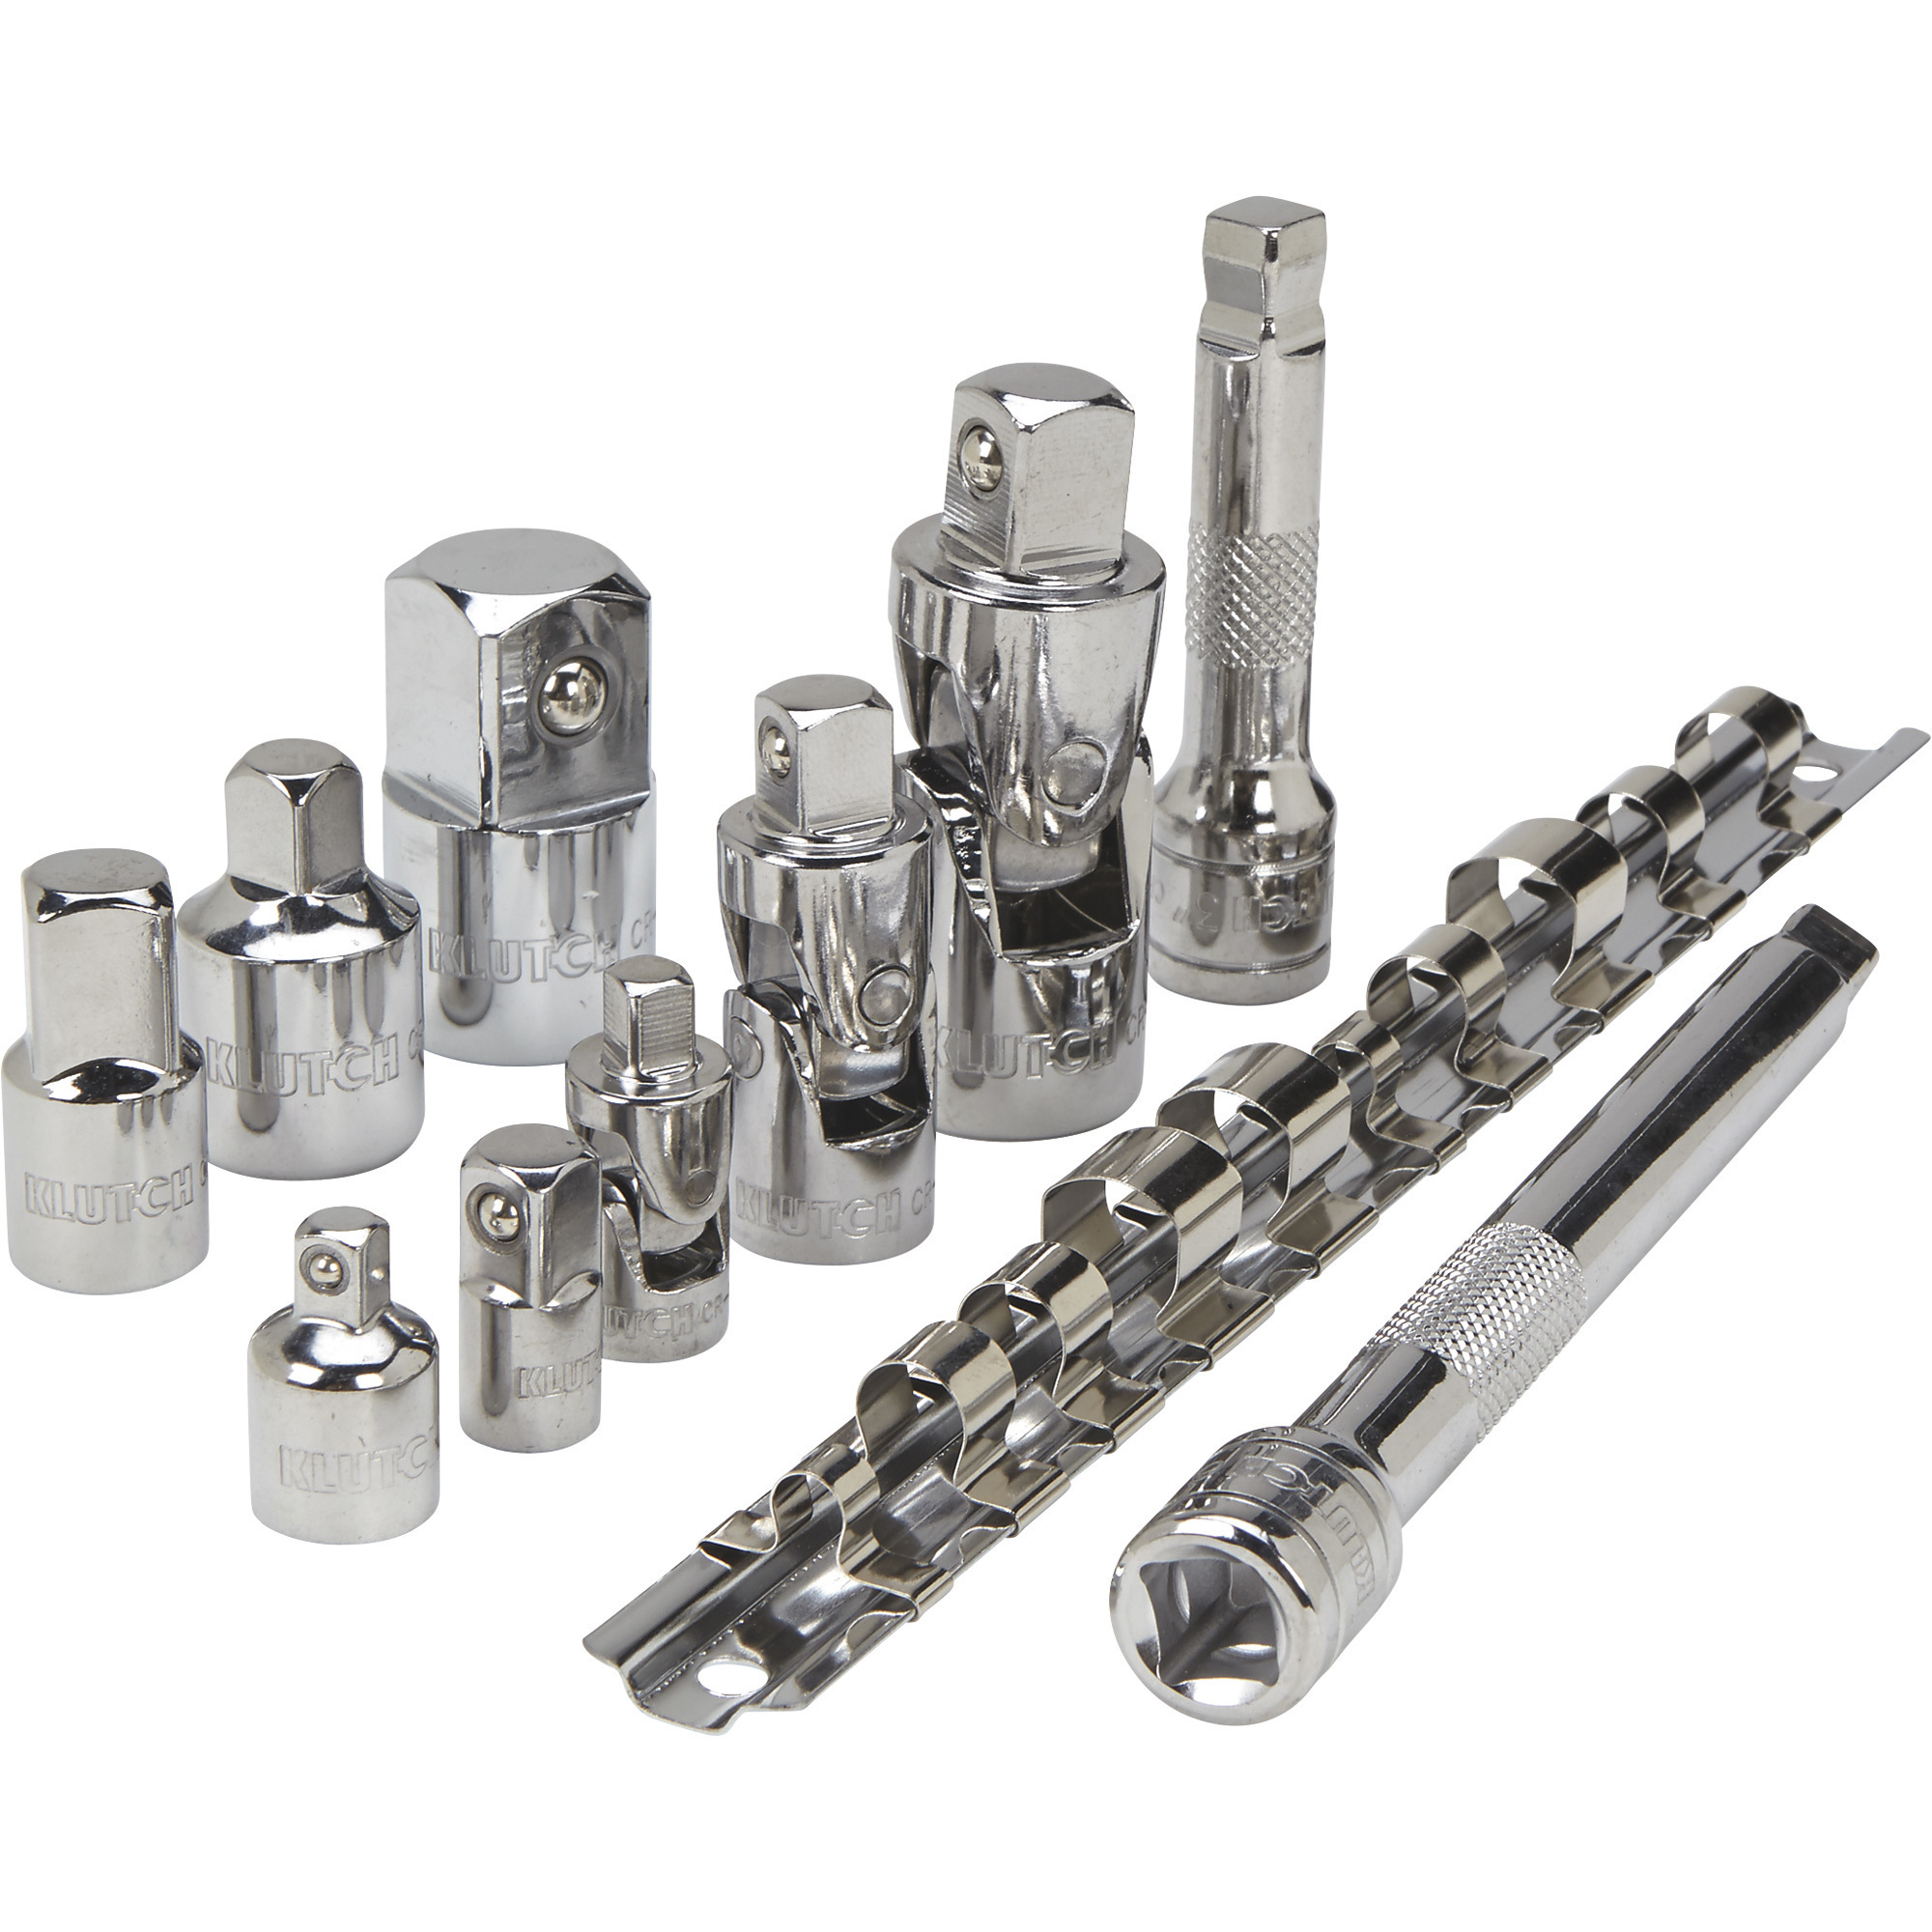 Klutch Socket Adapters, Universal Joints and Extensions, 10-Piece SAE Set